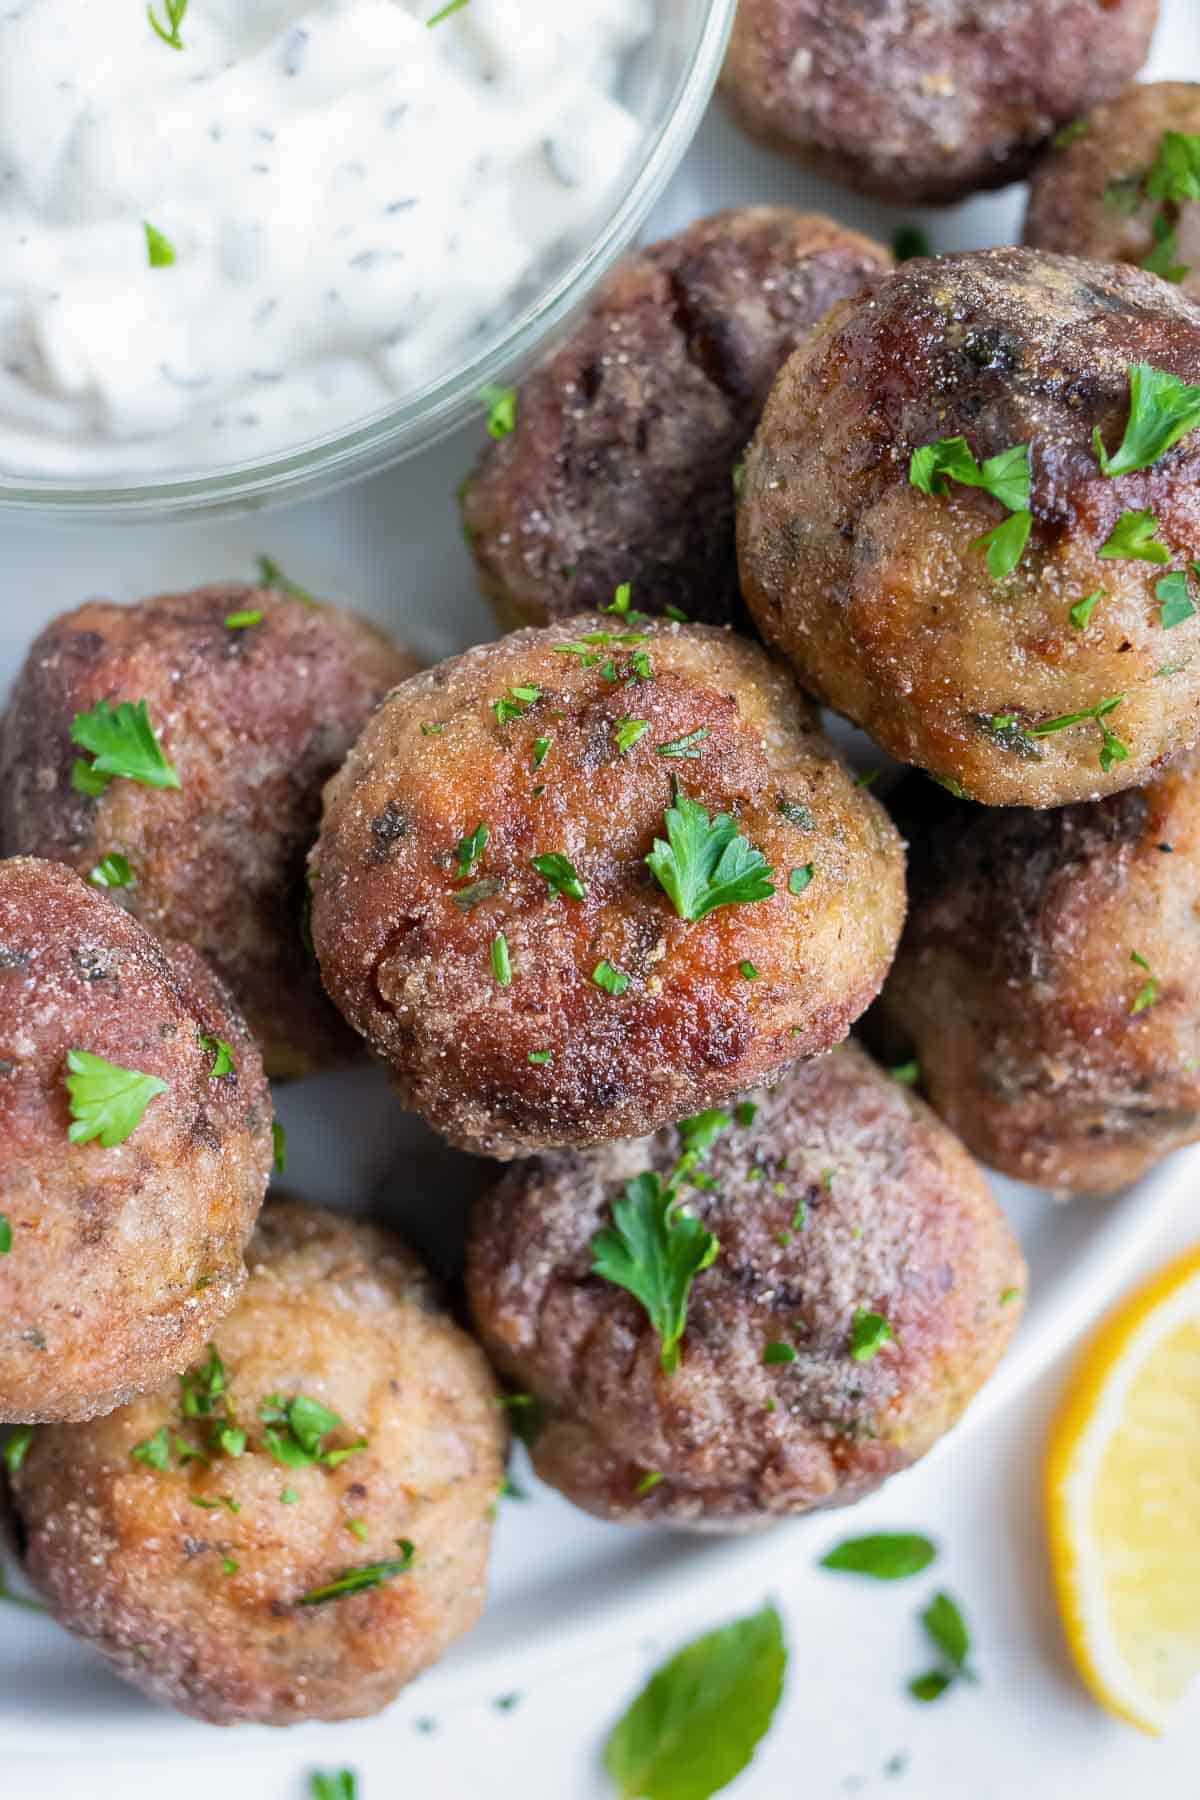 Top finished meatballs with a fresh mint leaves in this Mediterranean meatball recipe.